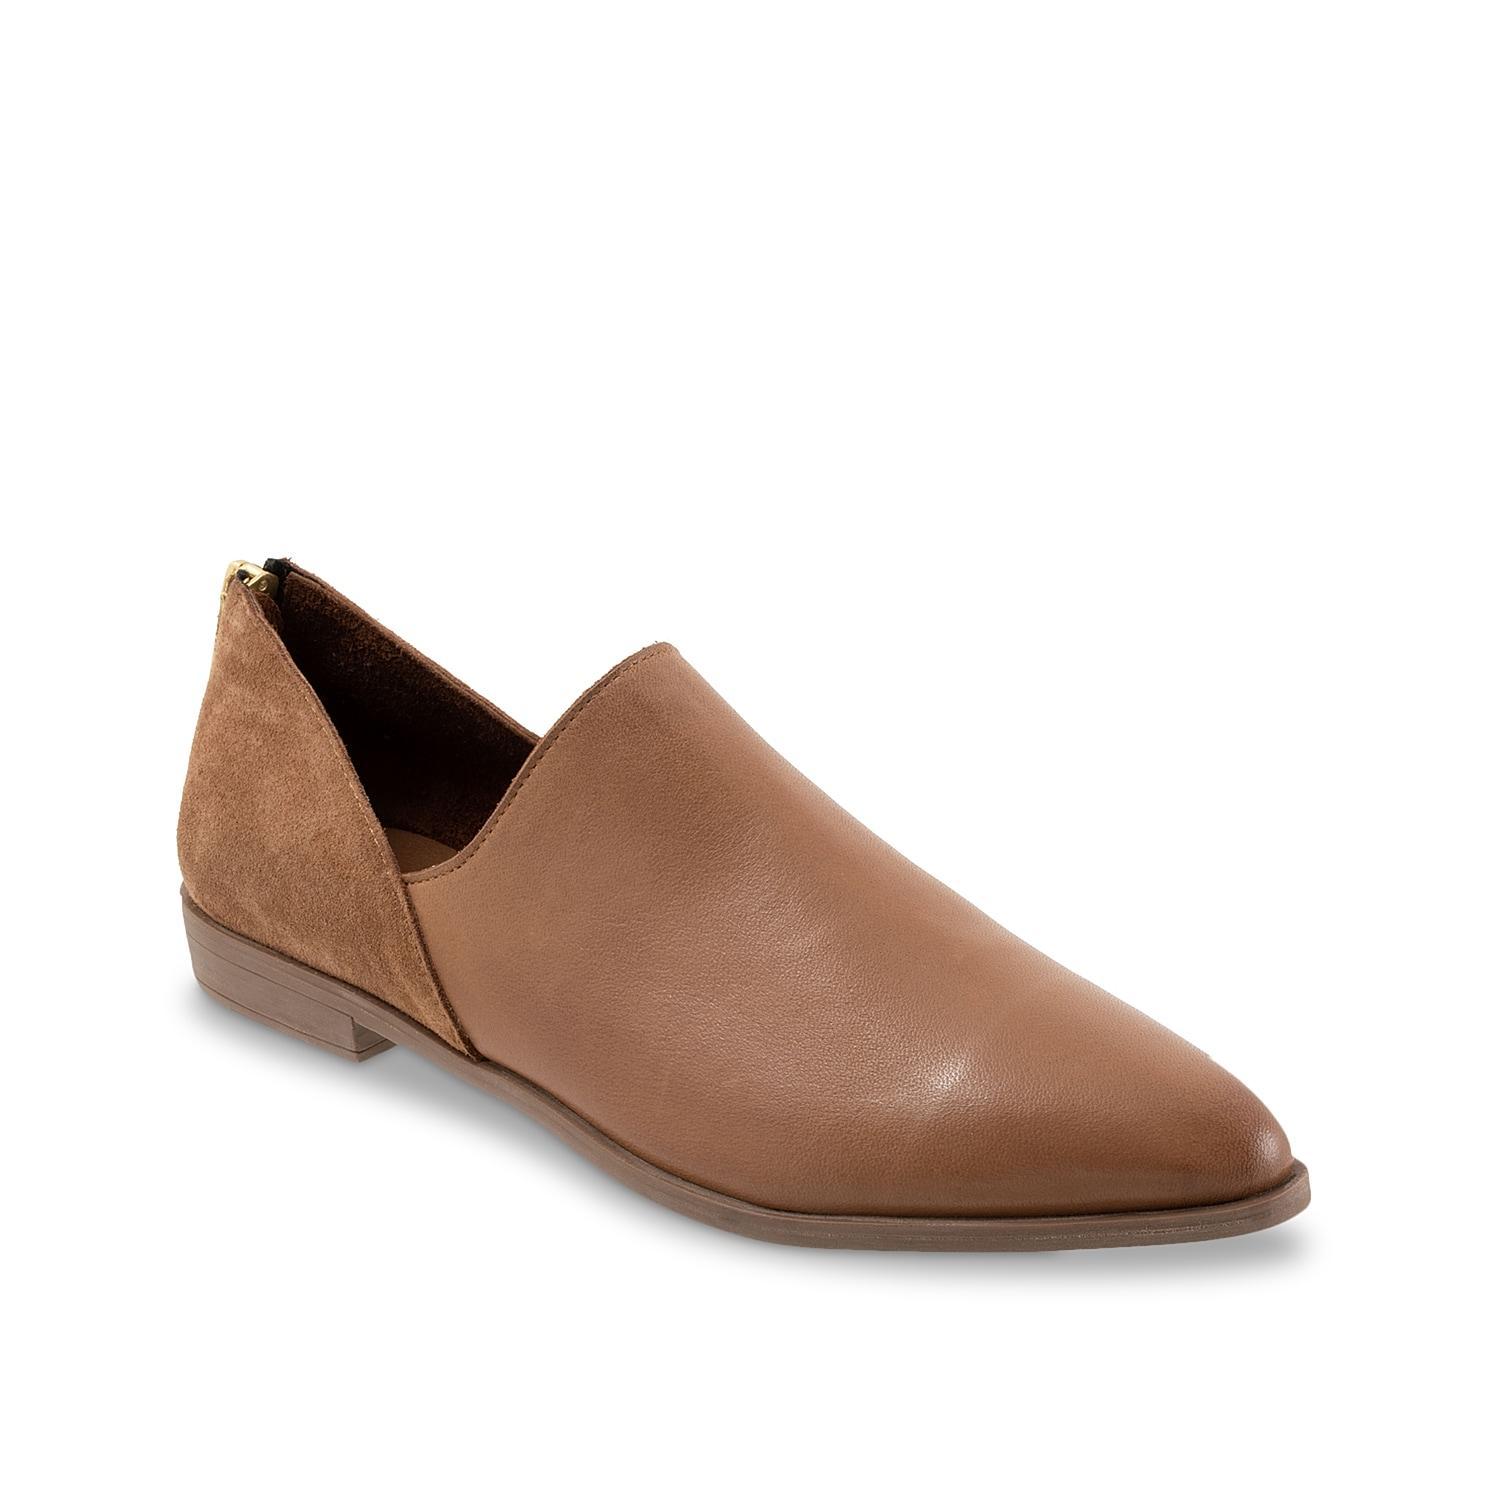 Bueno Beau Pointed Toe Loafer Product Image